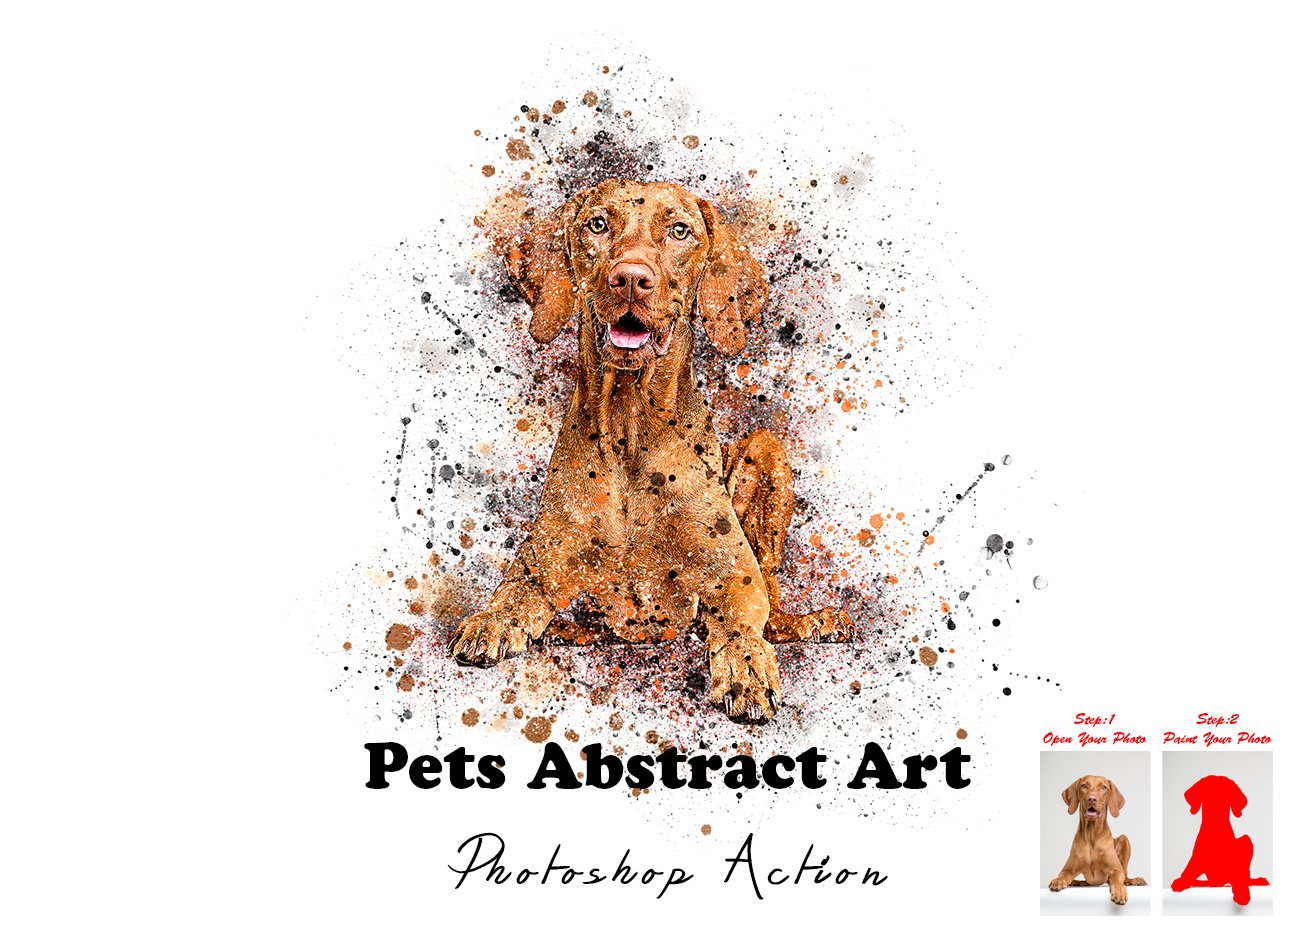 Pets Abstract Art Photoshop Actioncover image.